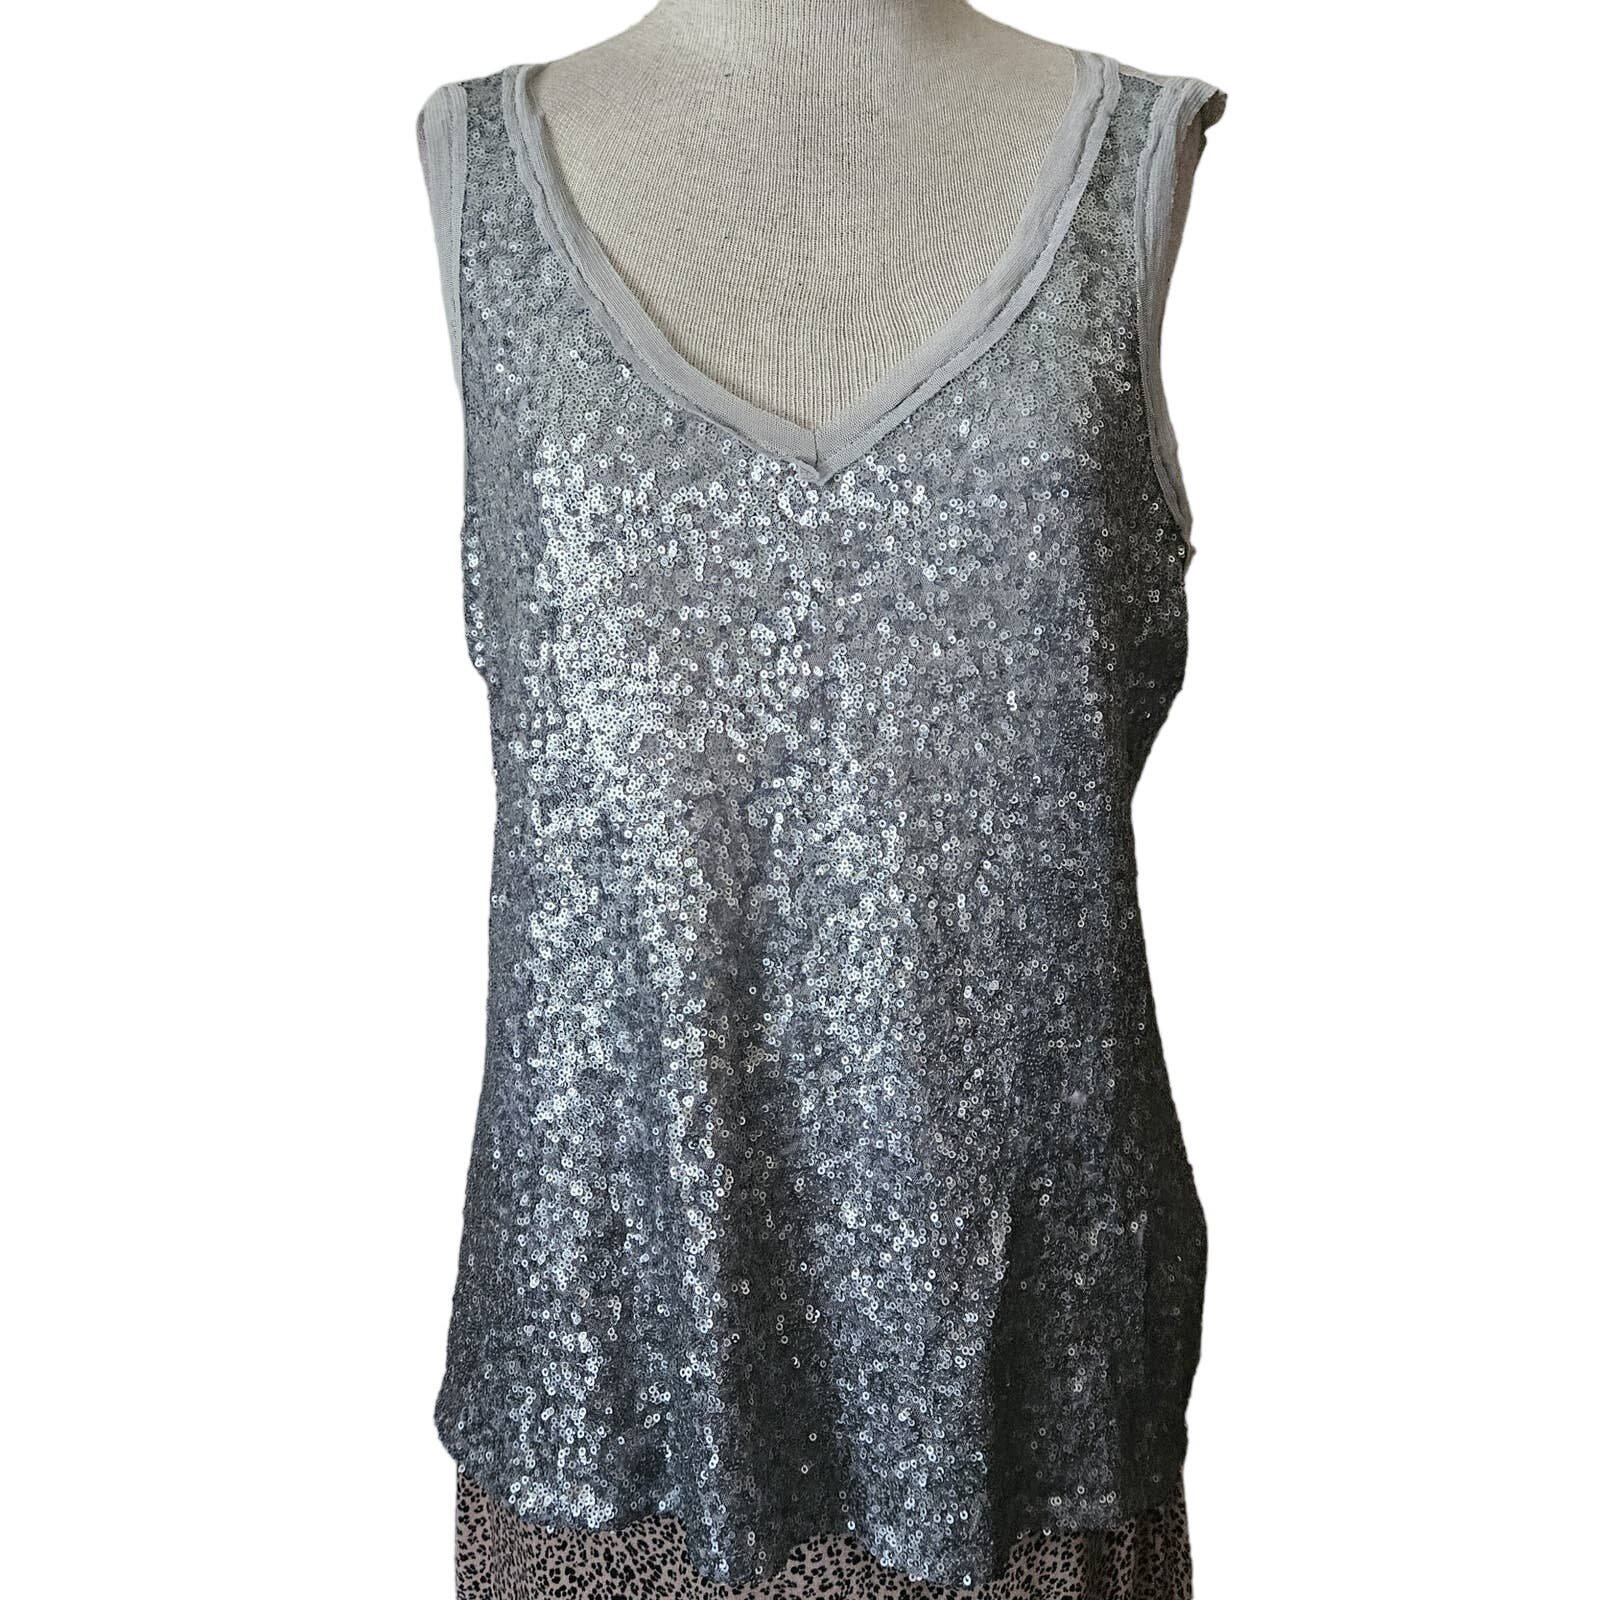 The Best Seller Silver Sequined Sleeveless Top Size Med